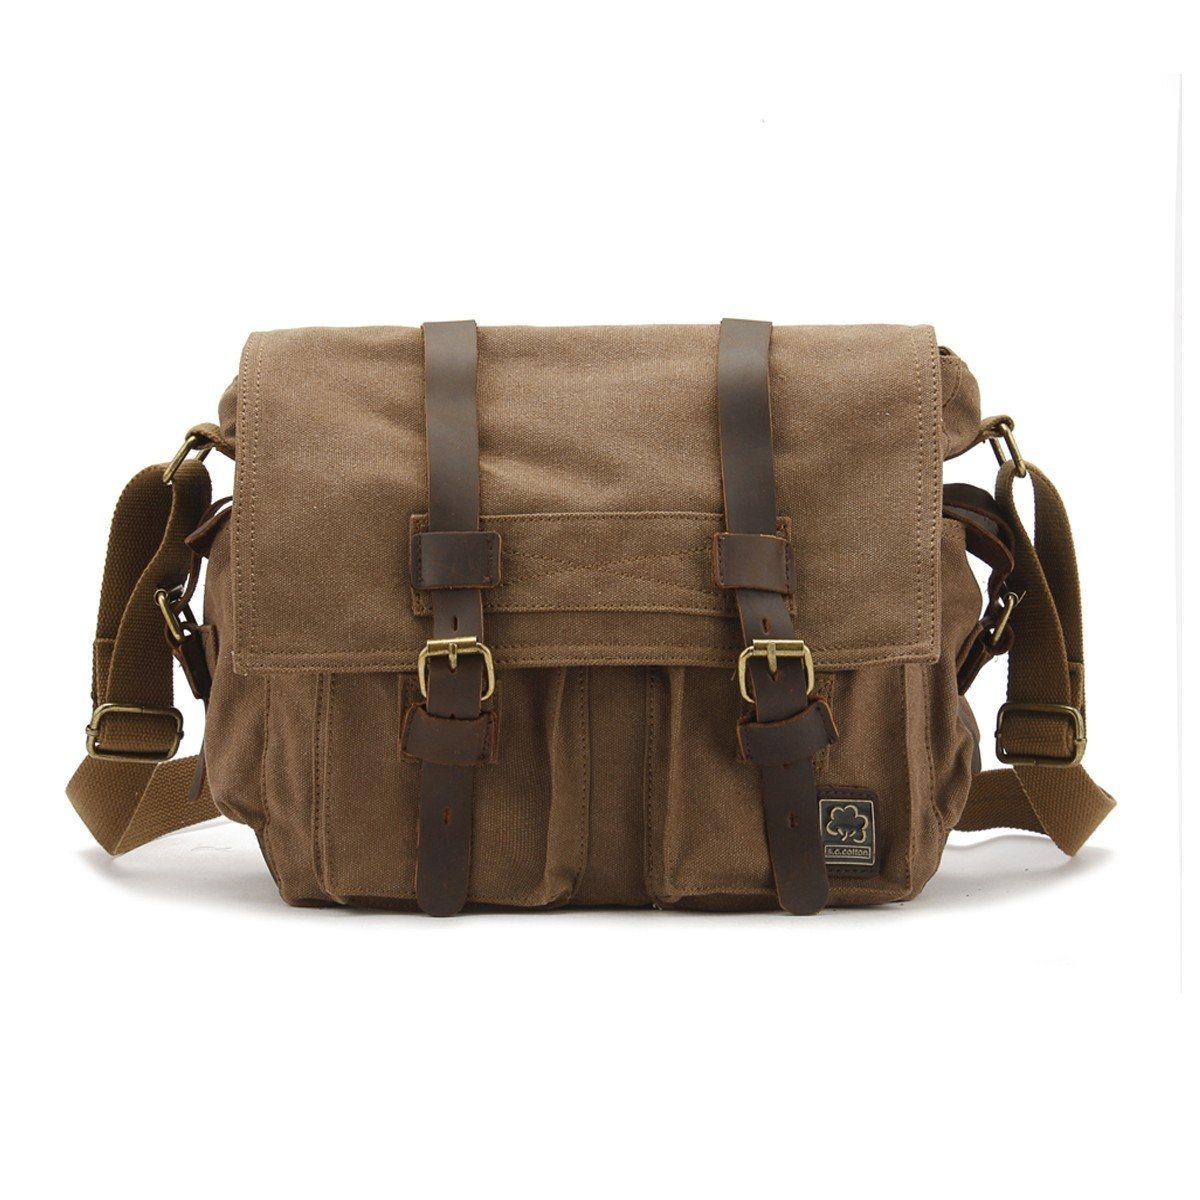 Military Vintage Canvas Crossbody Messenger Bag - Assorted Sizes / Coffee / Large